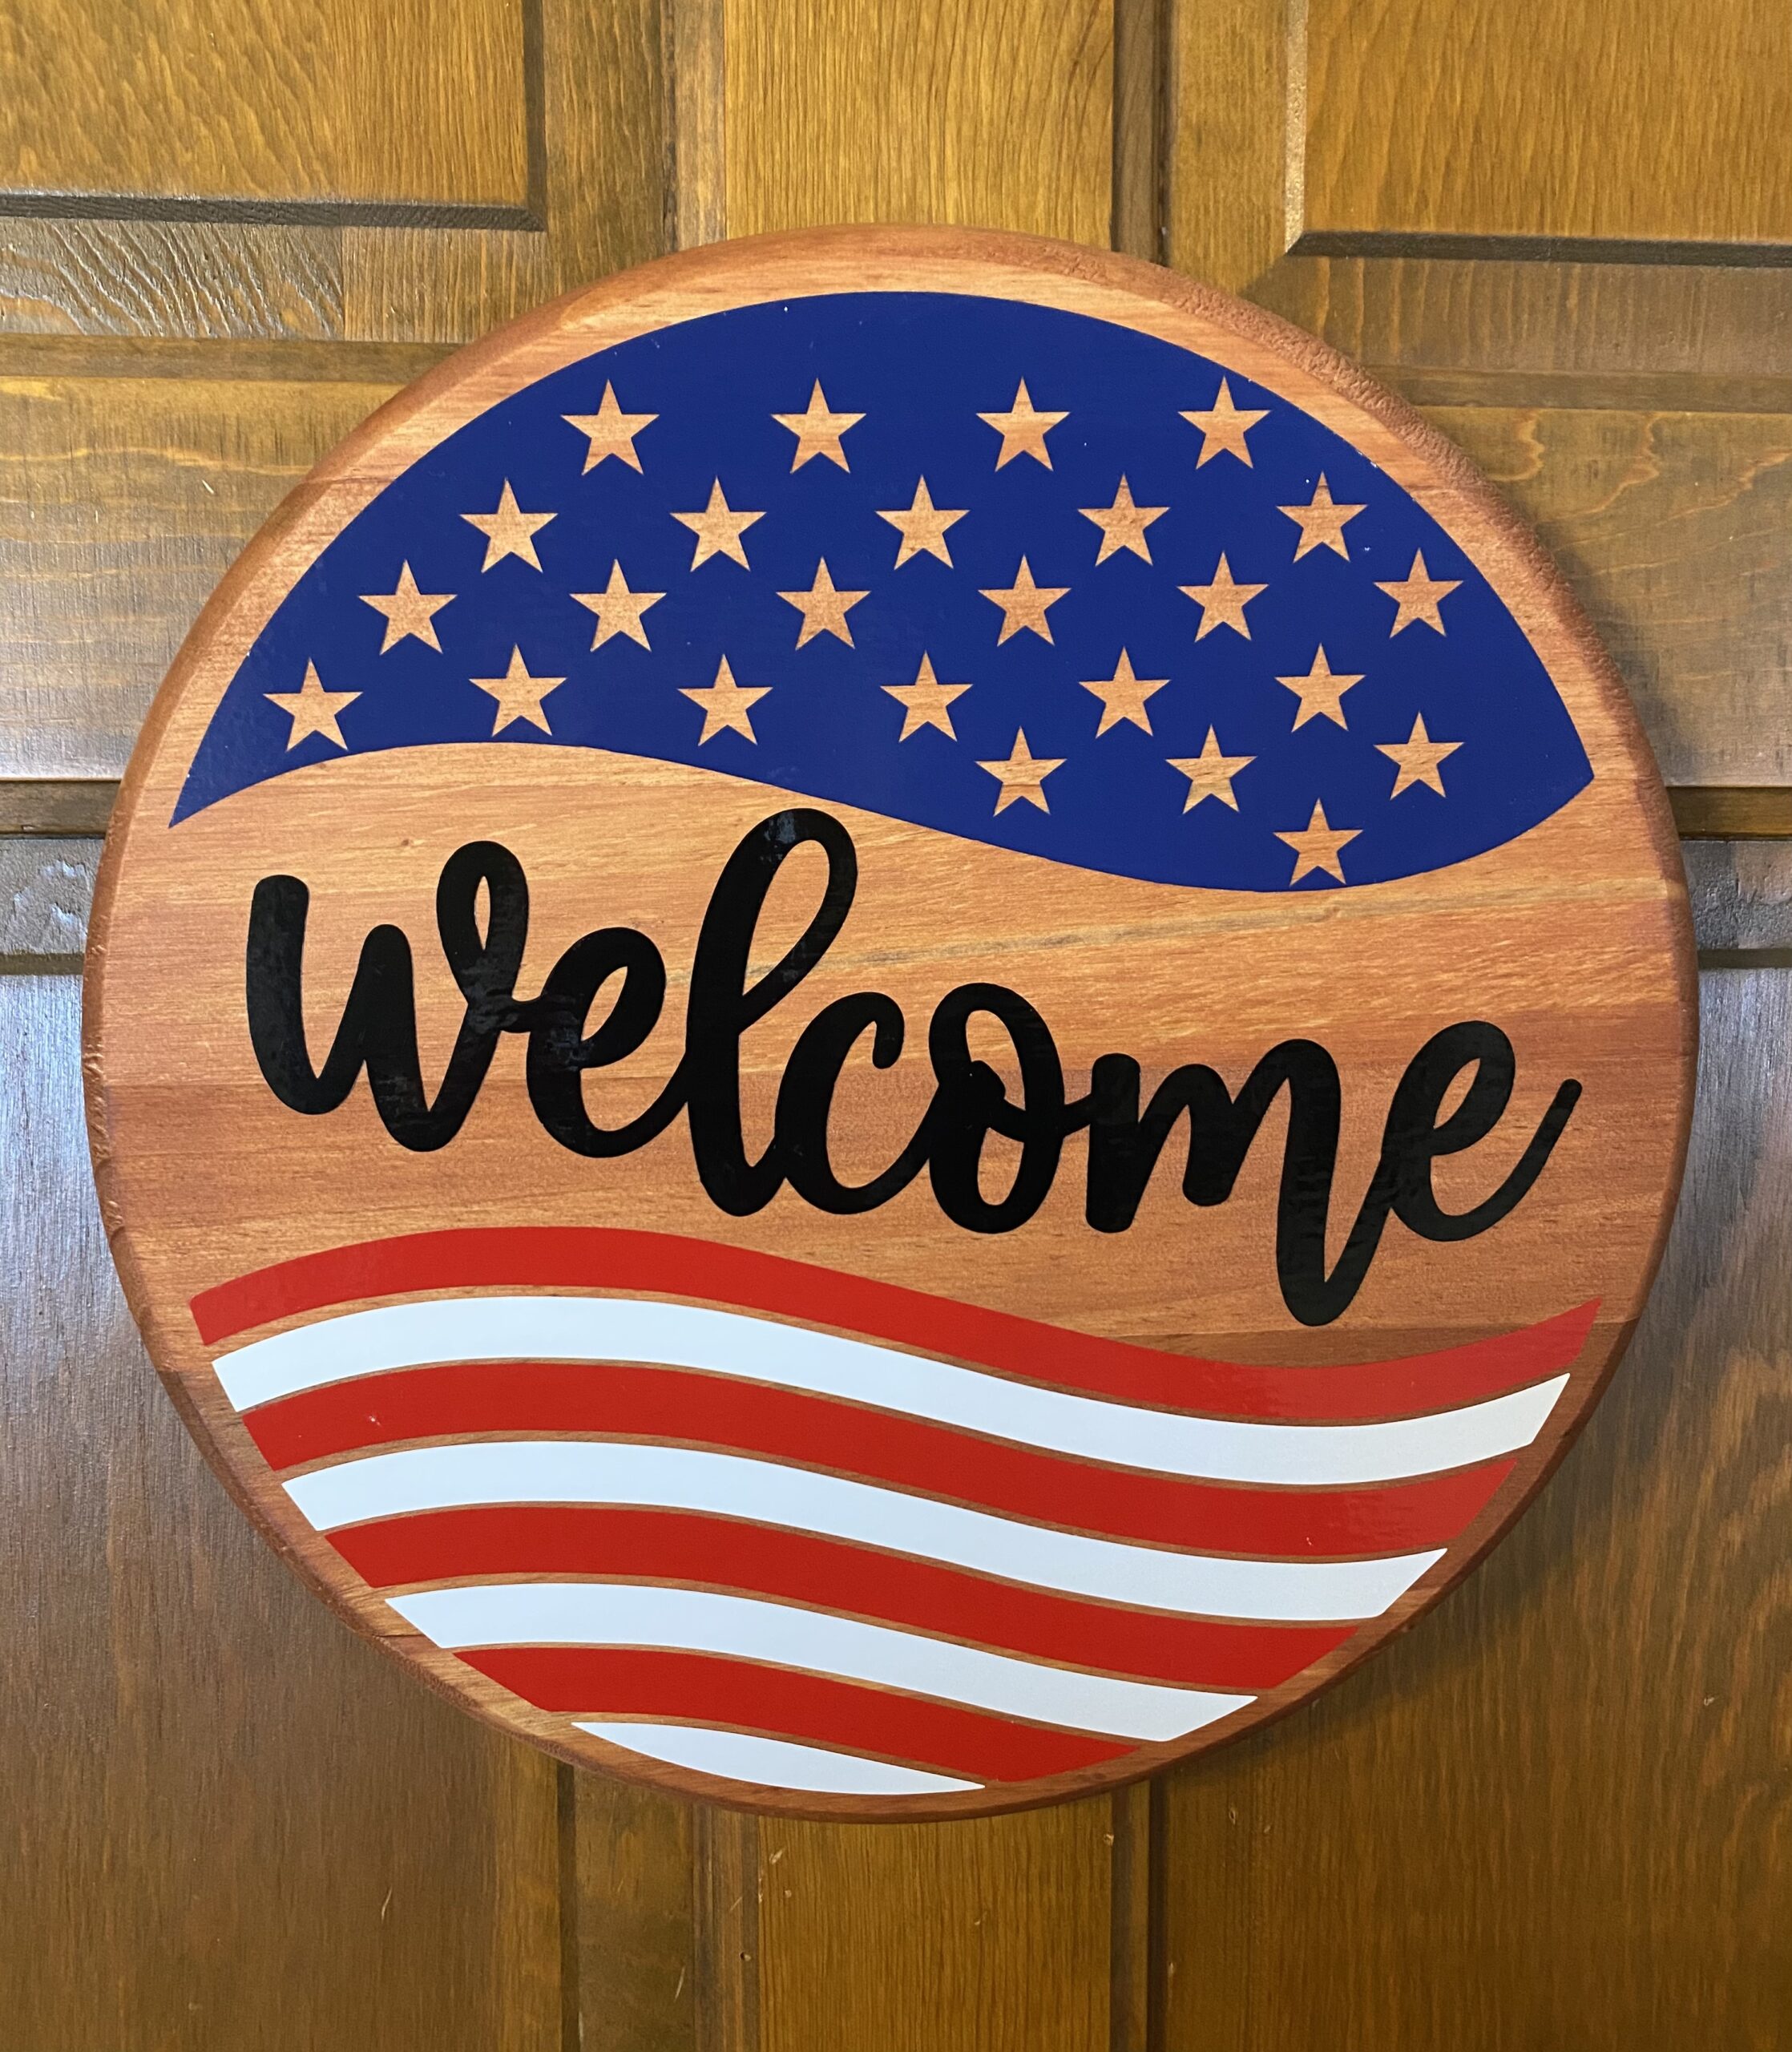 Wooden, round, sign that says "Welcome" and has a deconstructed American flag on it. 